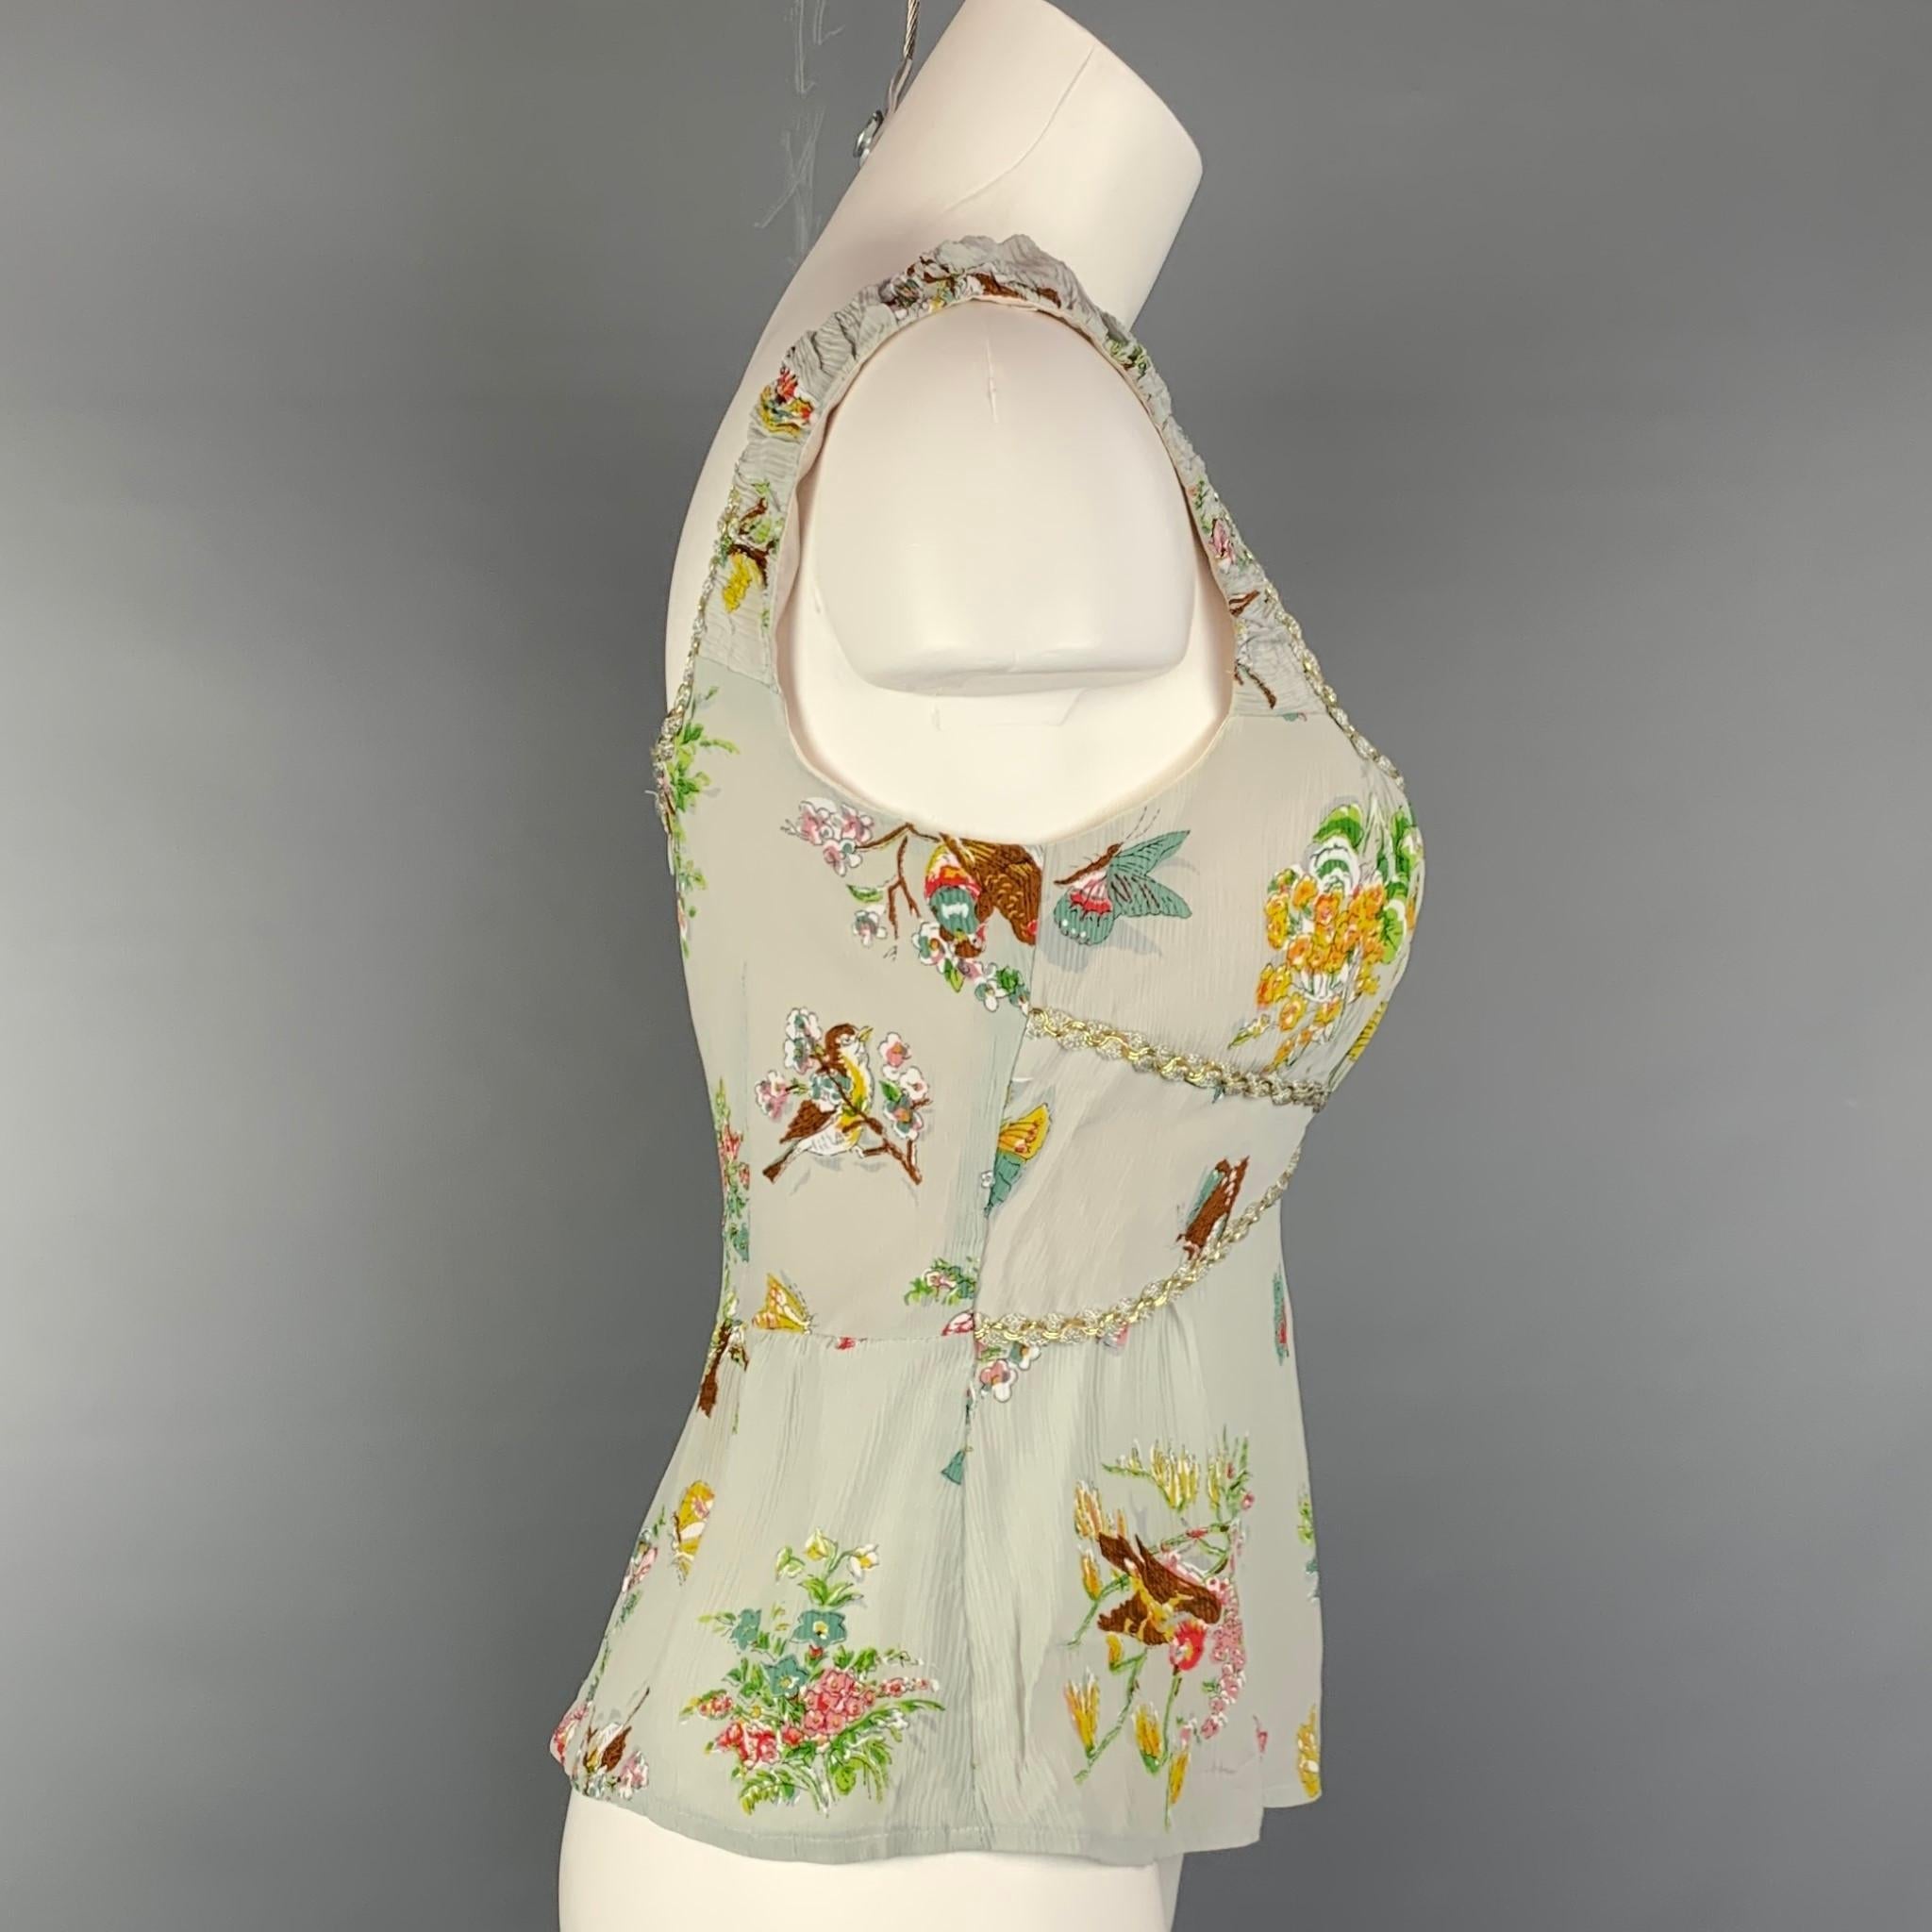 NANETTE LEPORE blouse comes in a multi-color floral silk featuring a ruched style, metallic trim, and a back zipper closure.

Very Good Pre-Owned Condition.
Marked: 4

Measurements:

Bust: 30 in.
Length: 13 in. 